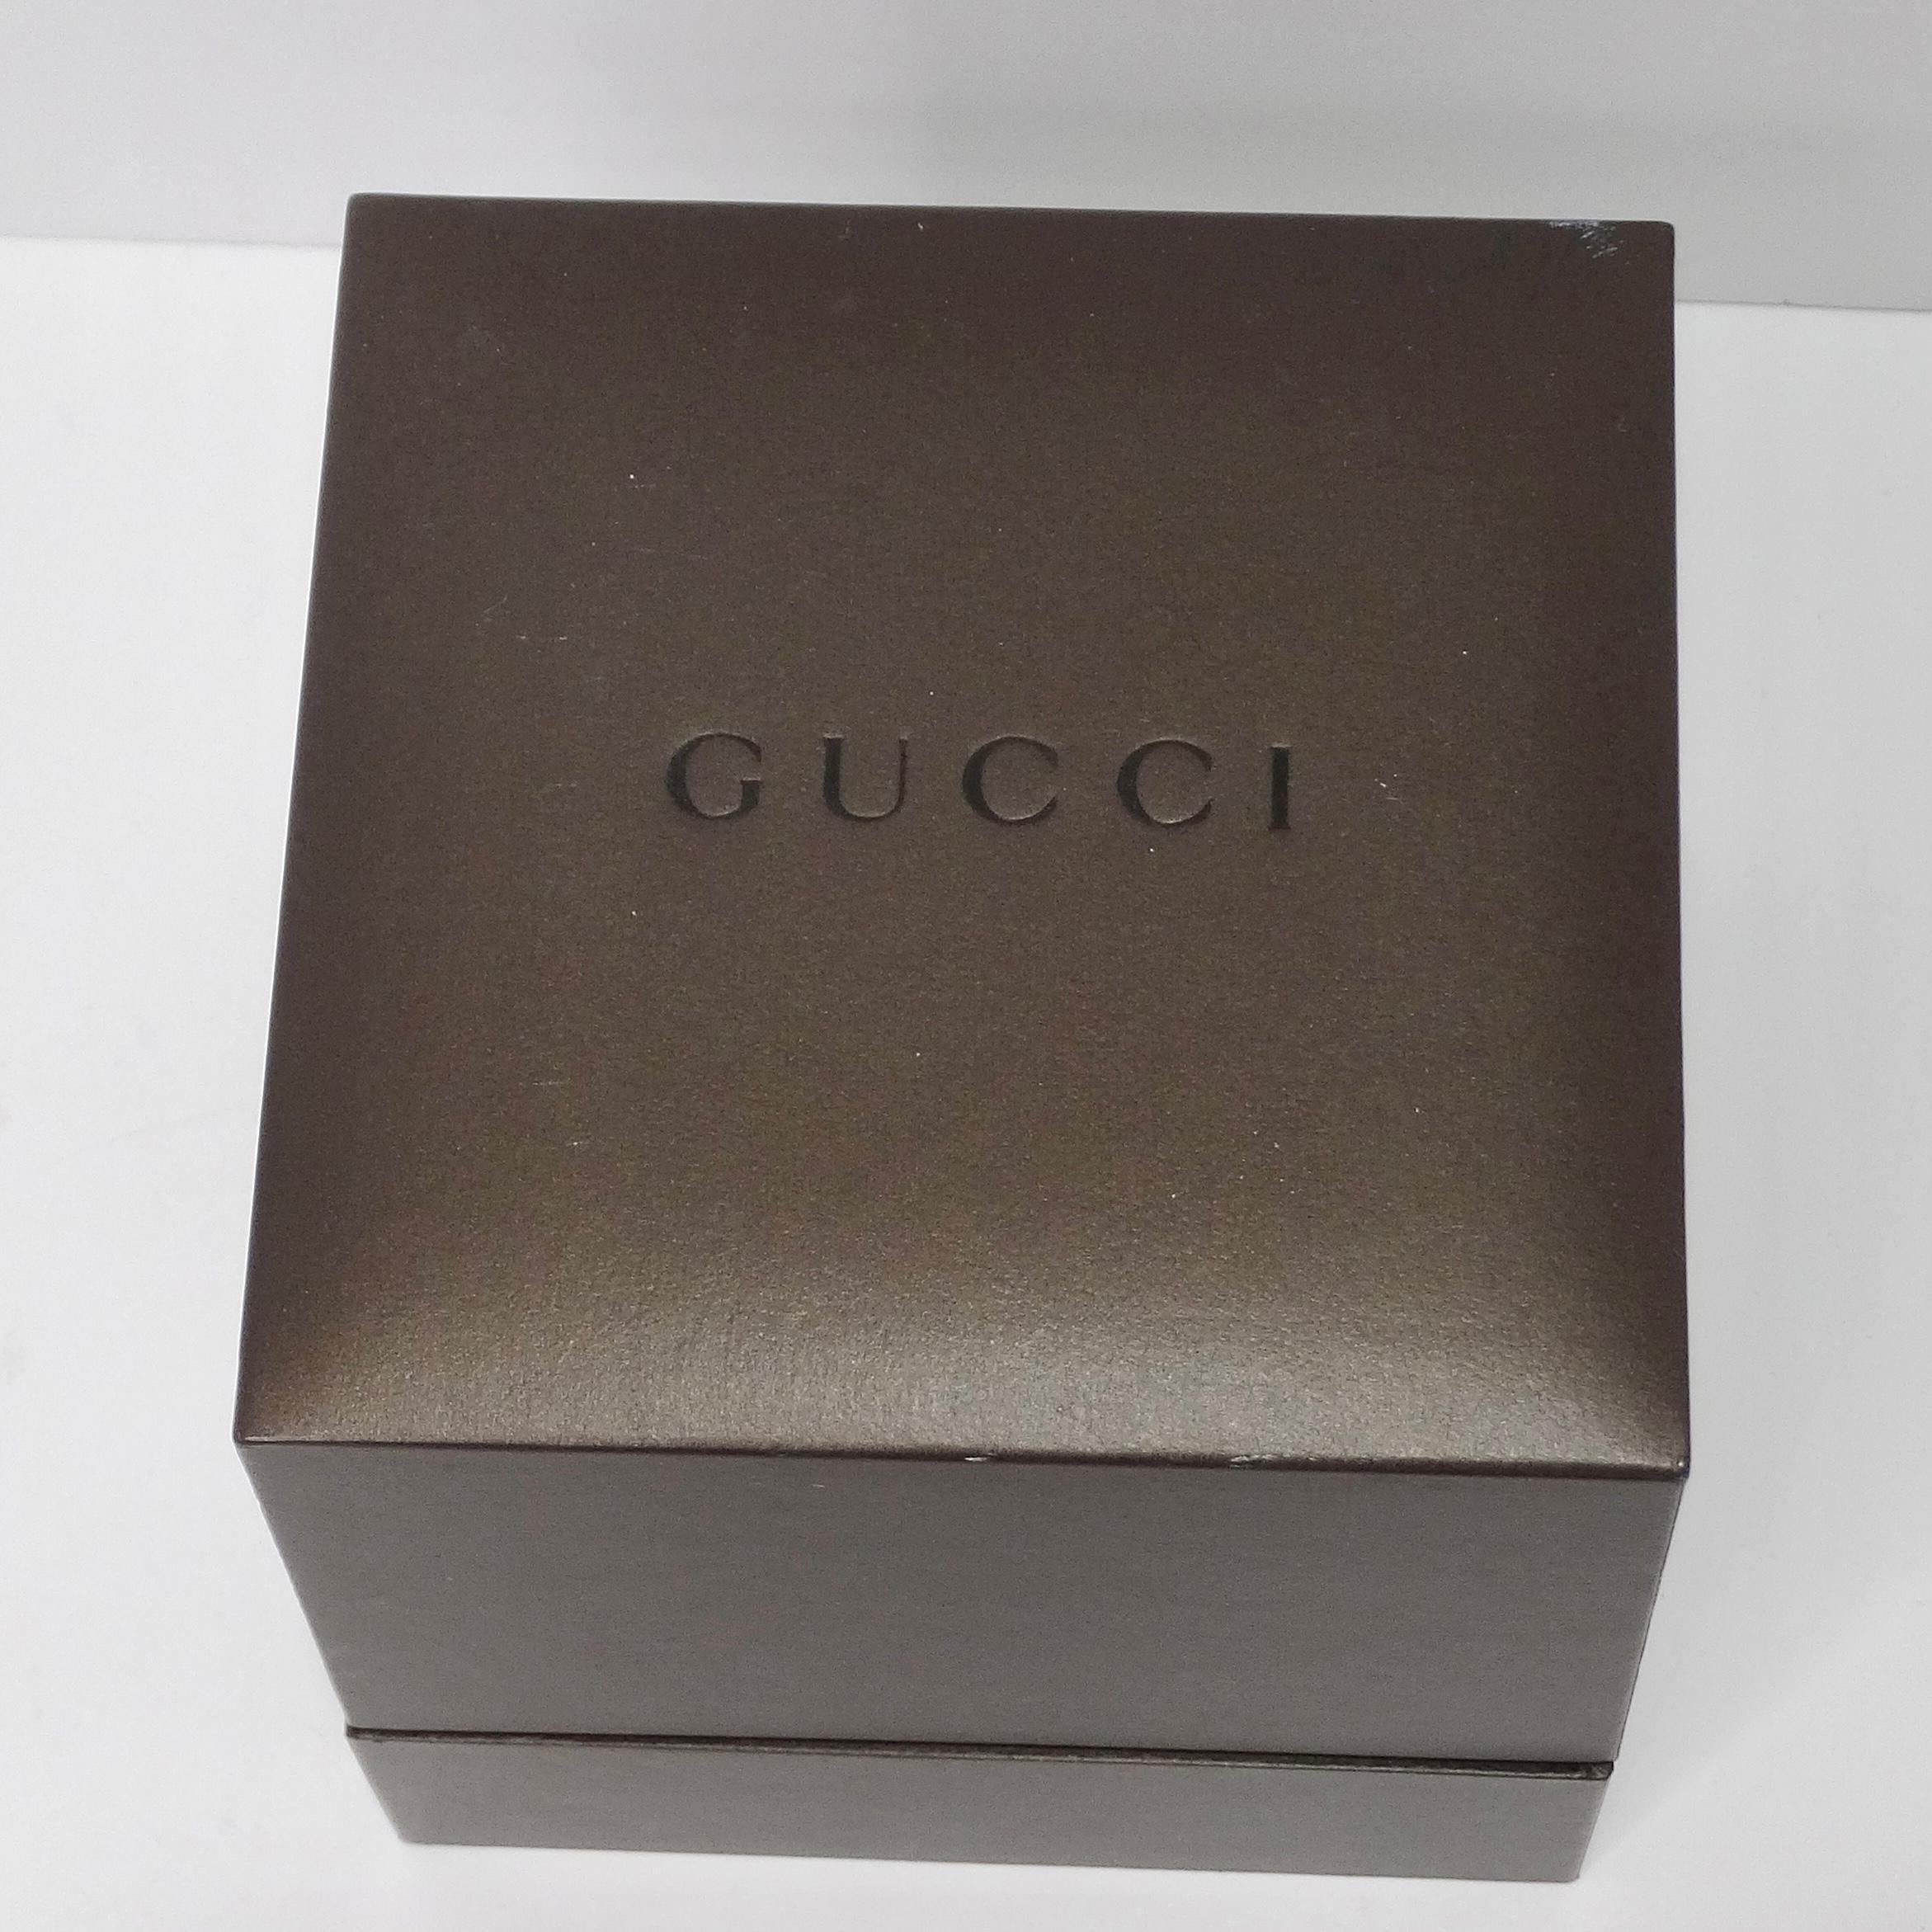 Introducing the exquisite Gucci gold tone watch - a stunning timepiece that exudes luxury and elegance. This brand new watch is expertly crafted from stainless steel, showcasing the impeccable quality that Gucci is renowned for. 
Made in